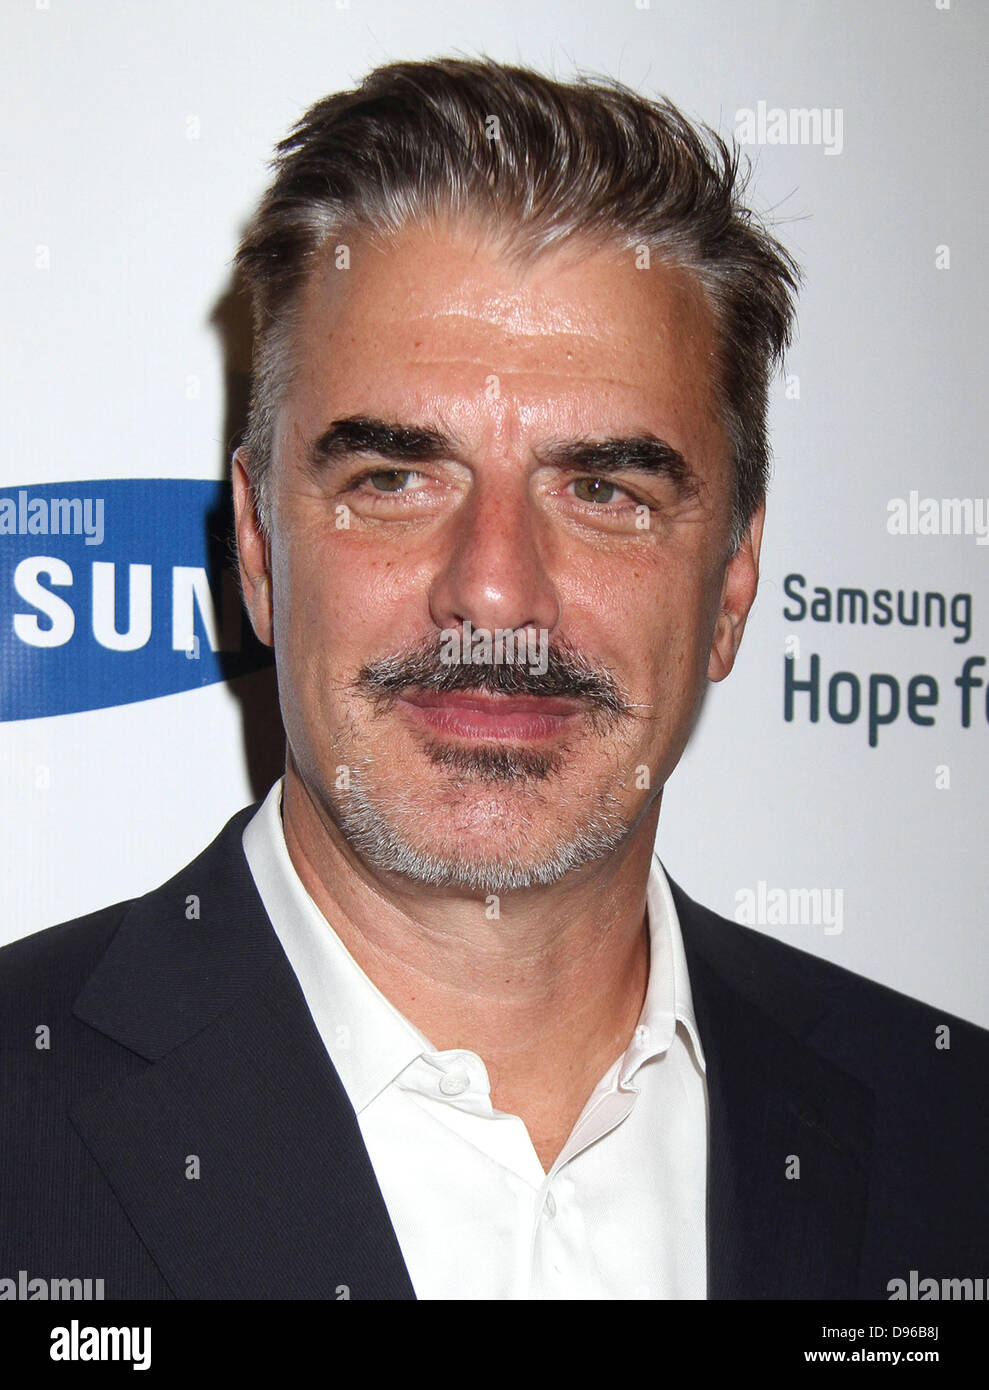 New York, New York, USA. 11th June, 2013. Actor CHRIS NOTH attends the arrivals for the Samsung Hope For Children Gala 2013 held at Cipriani, Wall Street. Credit: Credit:  Nancy Kaszerman/ZUMAPRESS.com/Alamy Live News Stock Photo